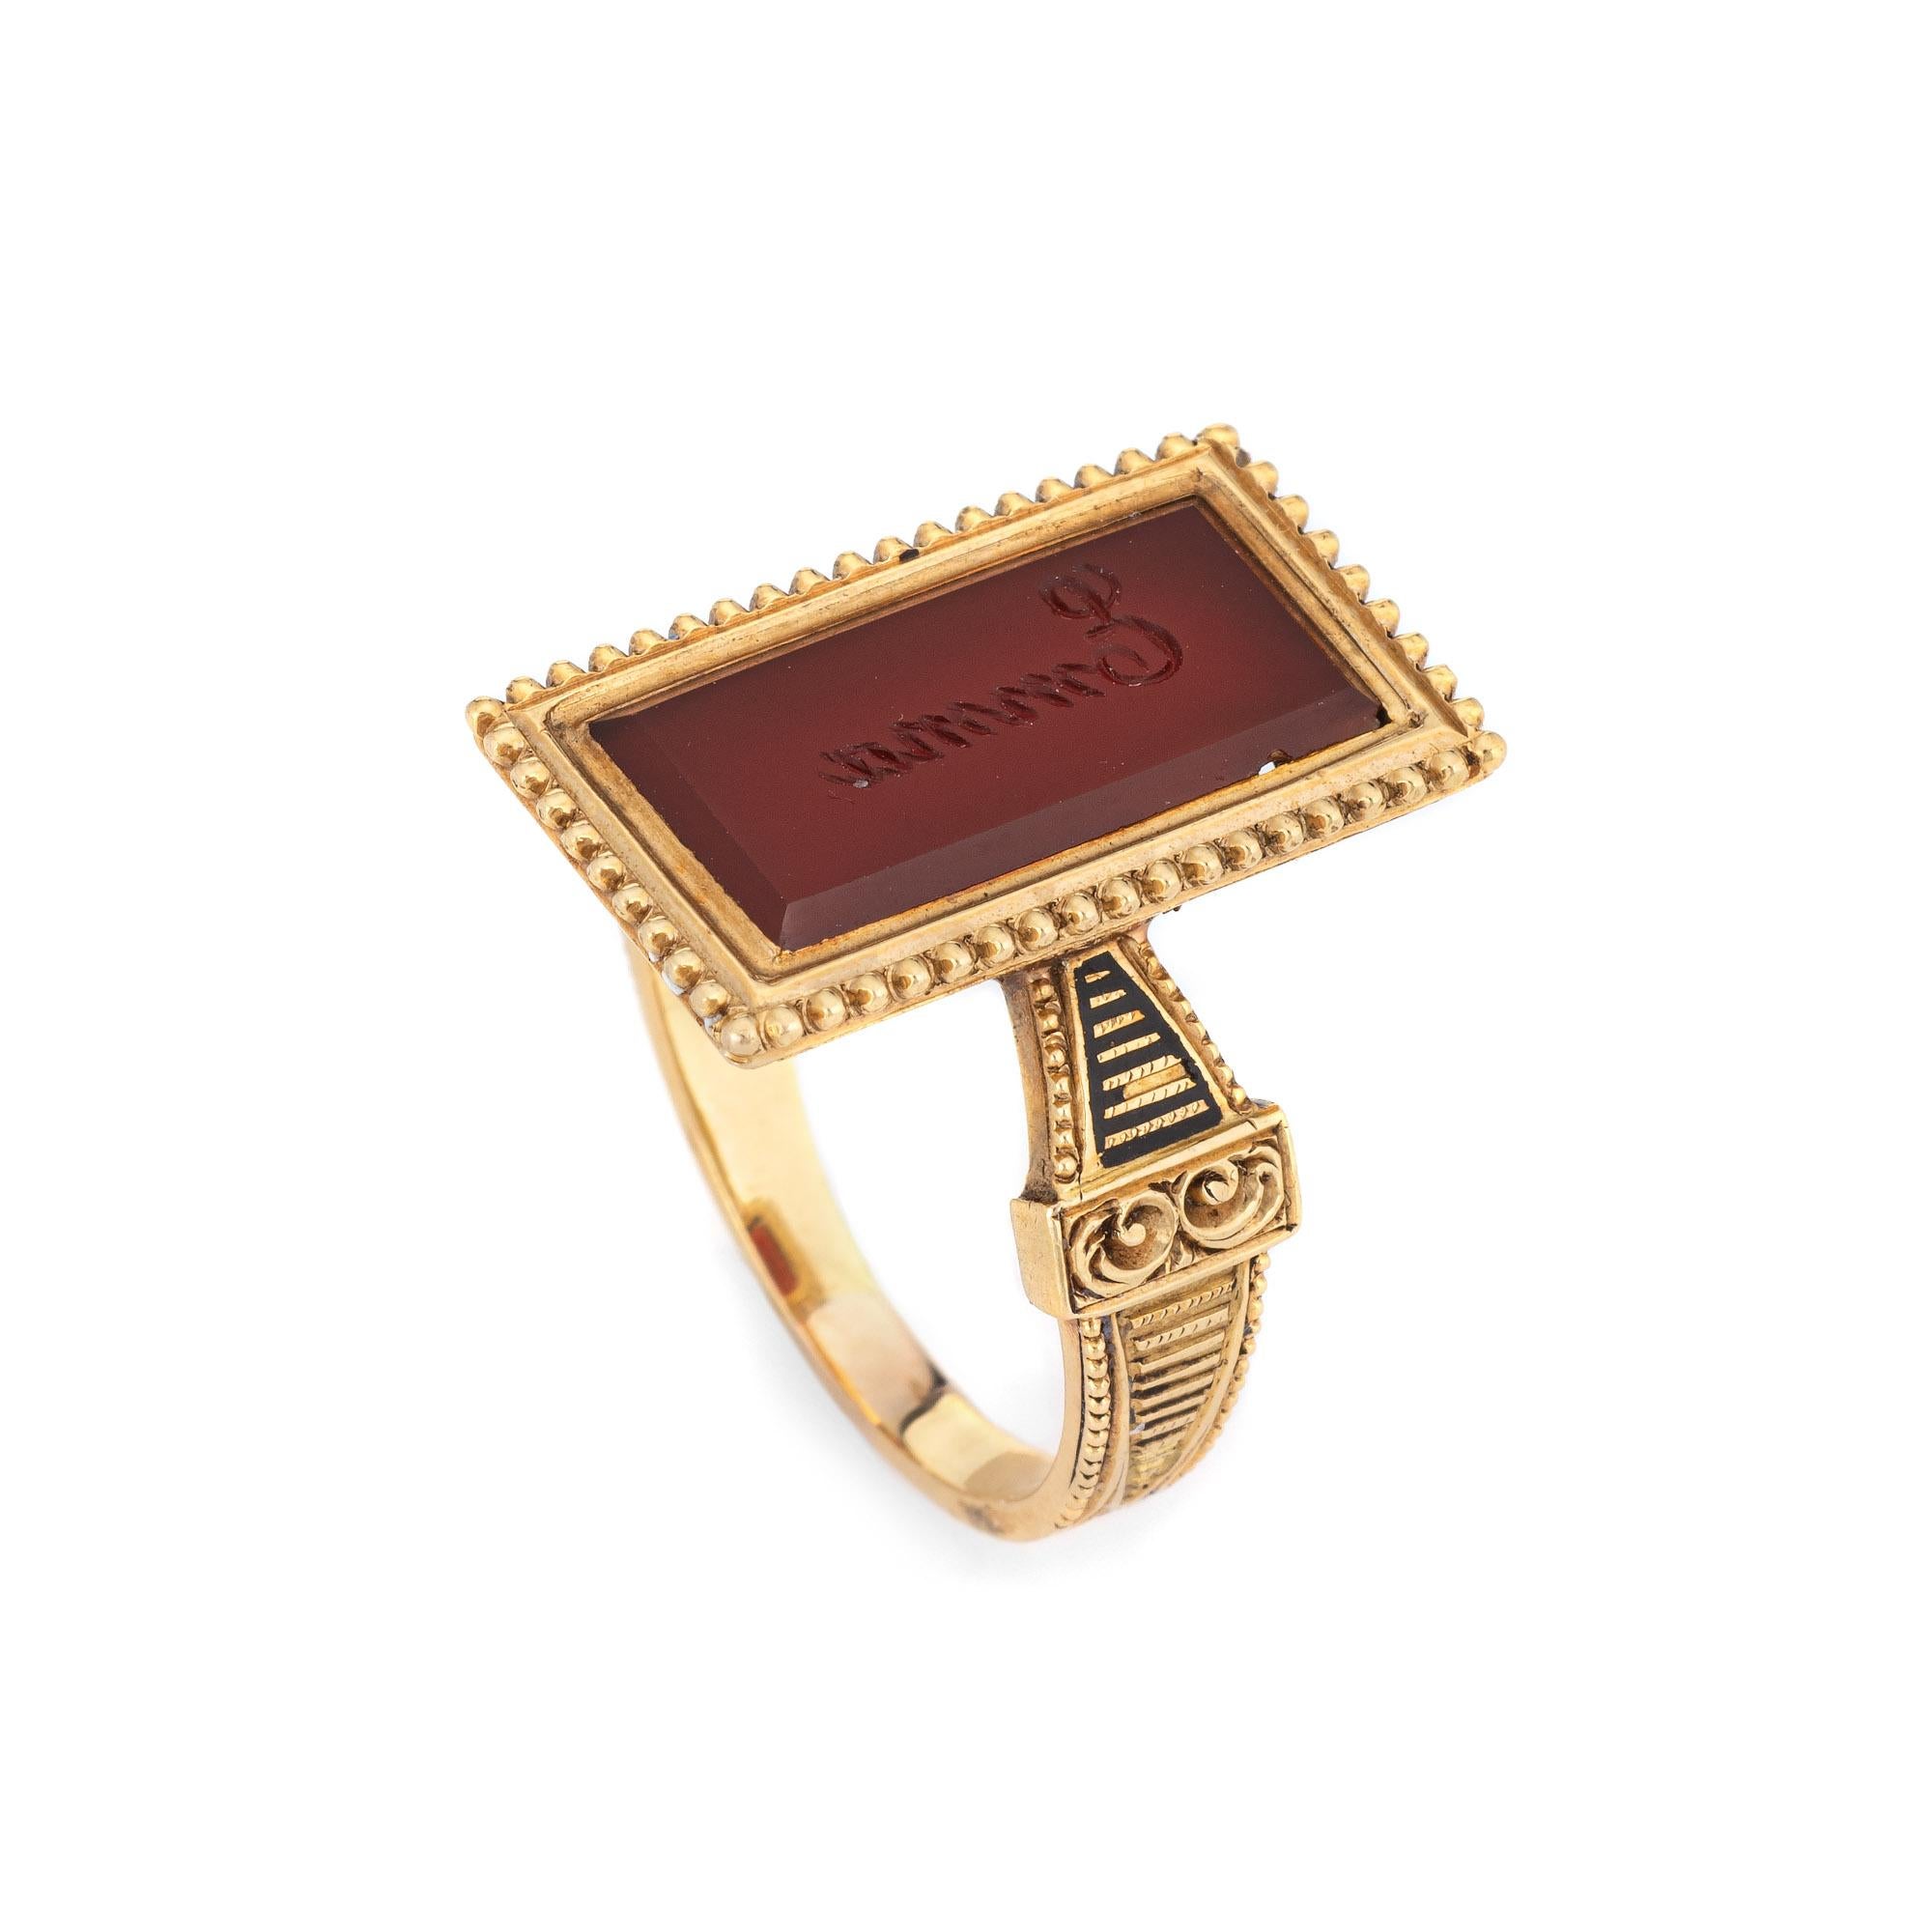 Beautifully detailed antique Victorian carnelian wax seal ring (circa 1880s to 1900s), crafted in 18 karat yellow gold. 

Carnelian measures 16mm x 7.5mm (in very good condition and free of cracks or chips). Few light surface abrasions visible under